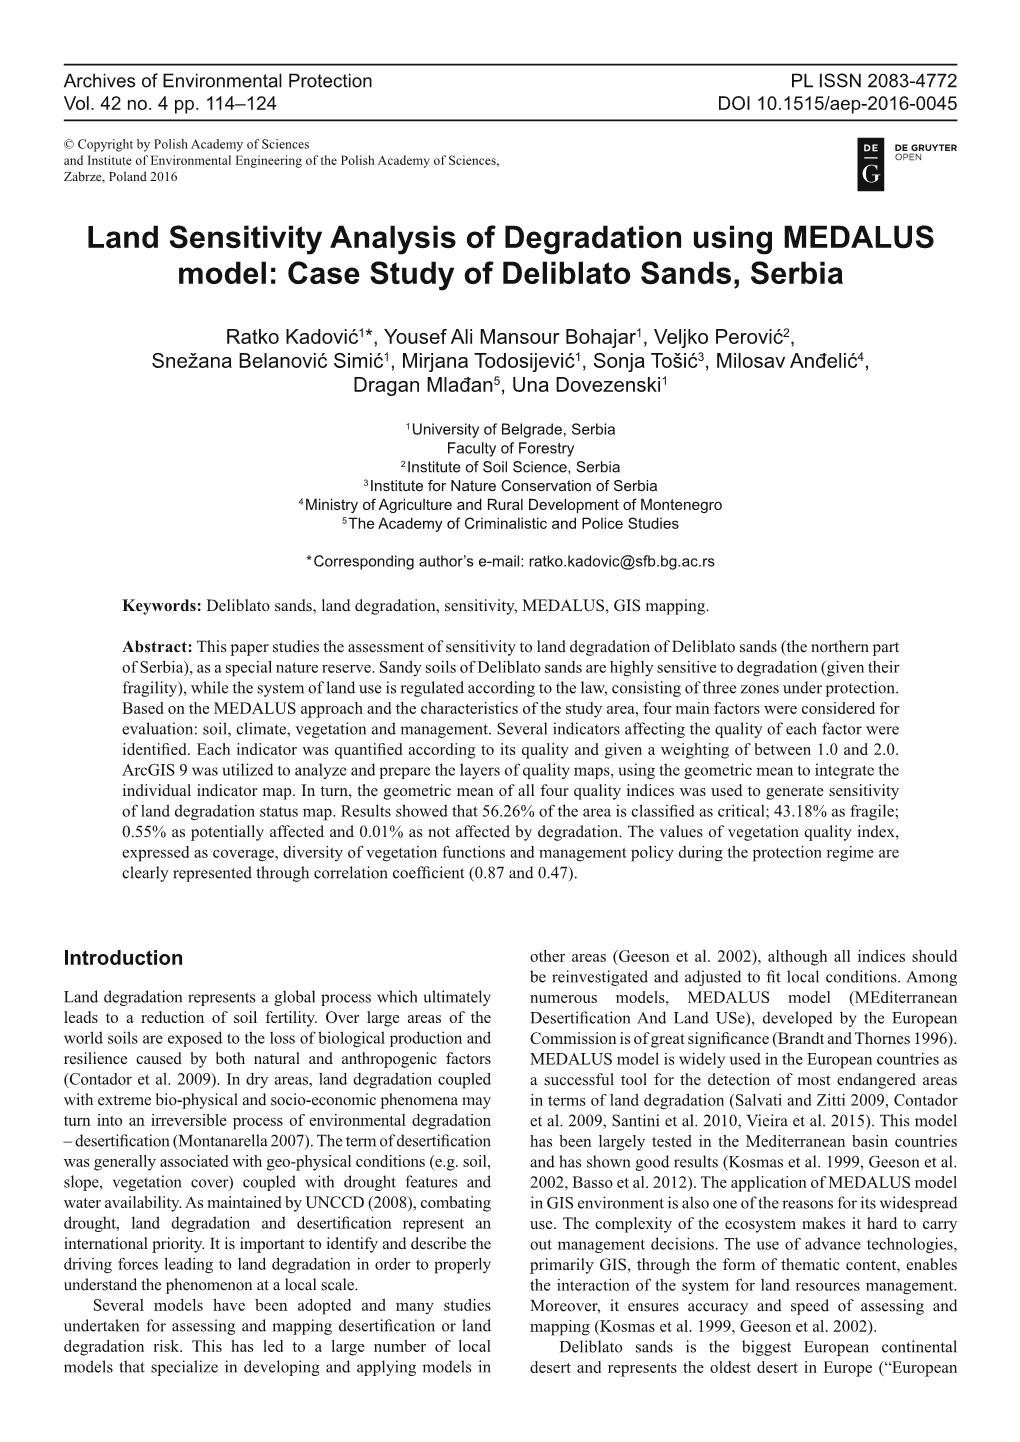 Land Sensitivity Analysis of Degradation Using MEDALUS Model: Case Study of Deliblato Sands, Serbia